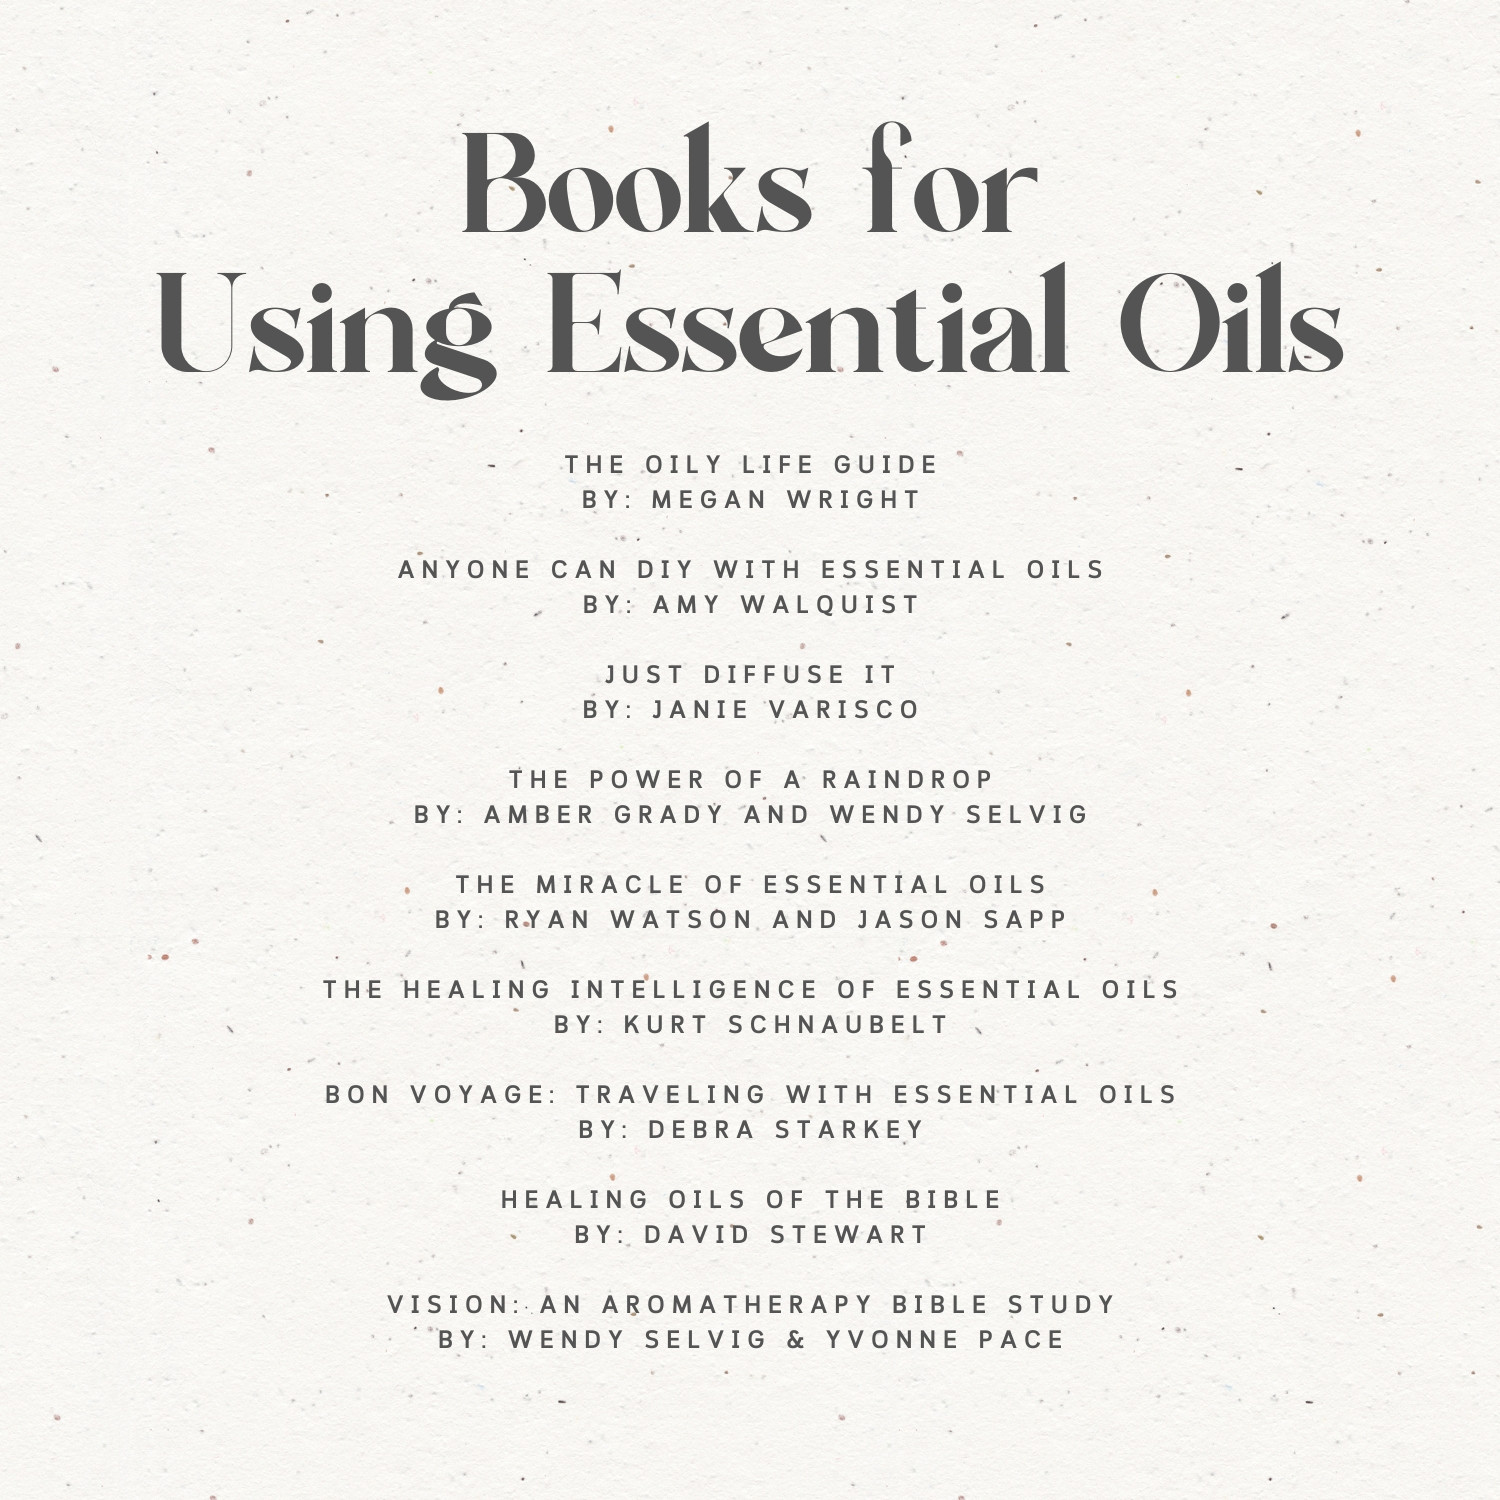 Resources, Books about using essential oils